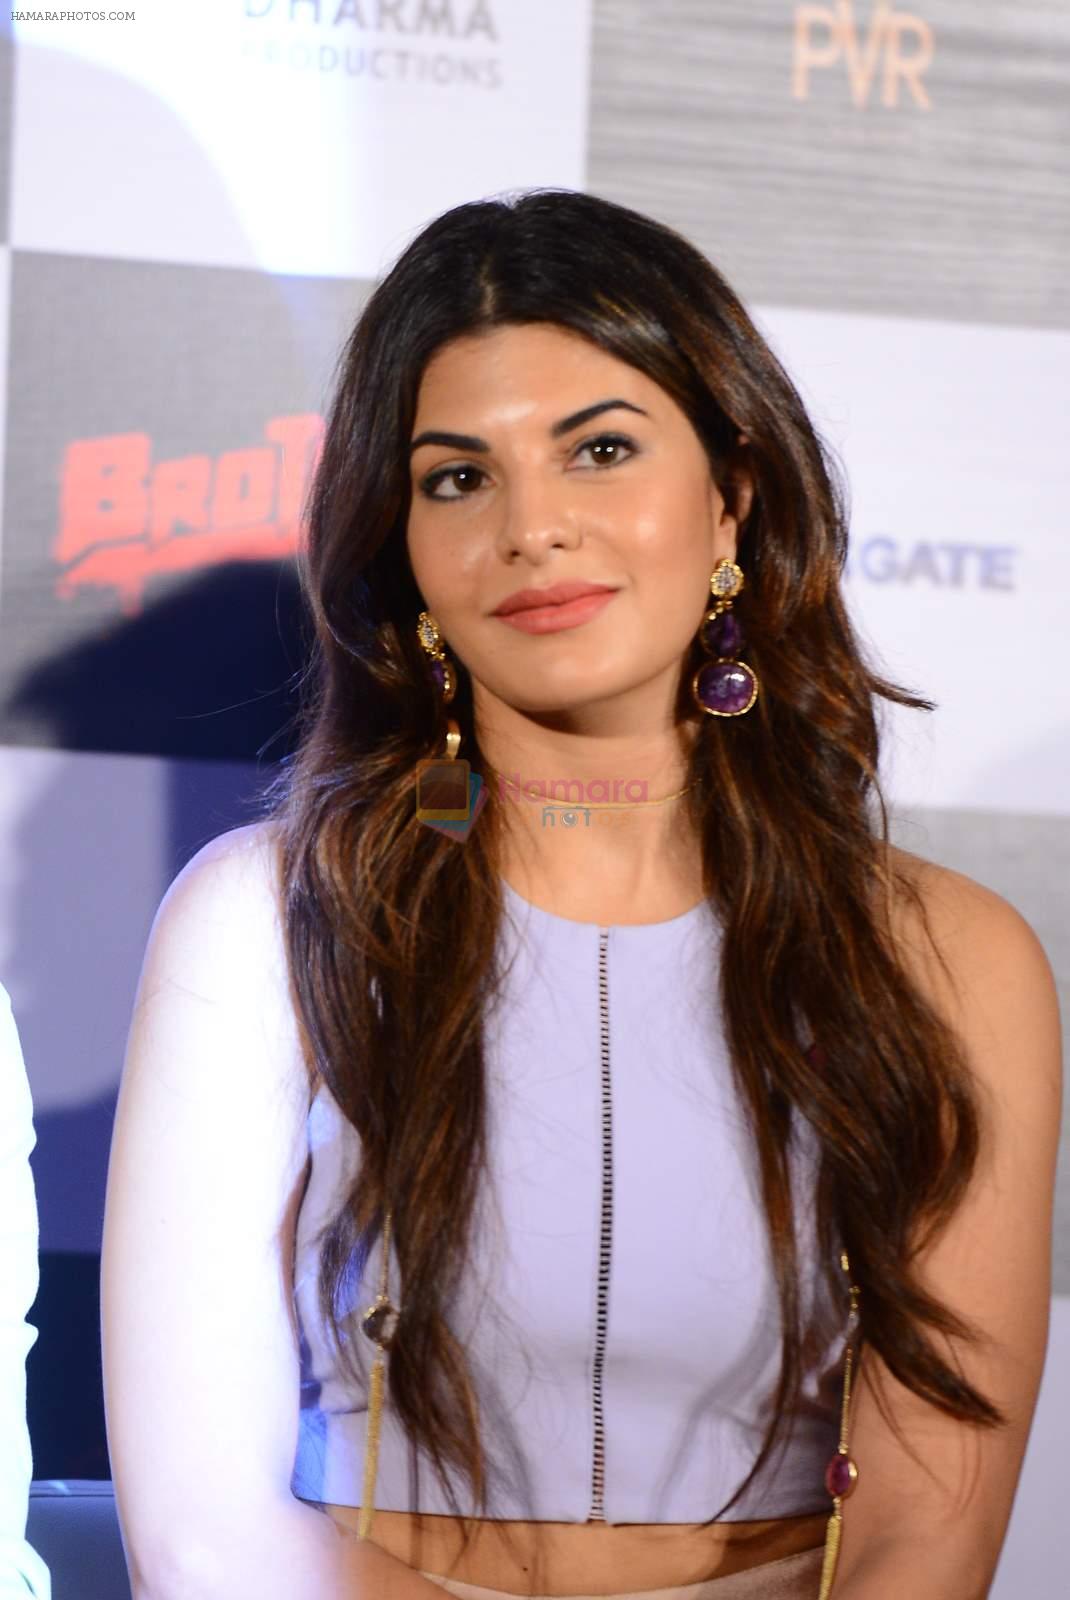 Jacqueline Fernandez at Brothers trailor launch in Mumbai on 10th June 2015